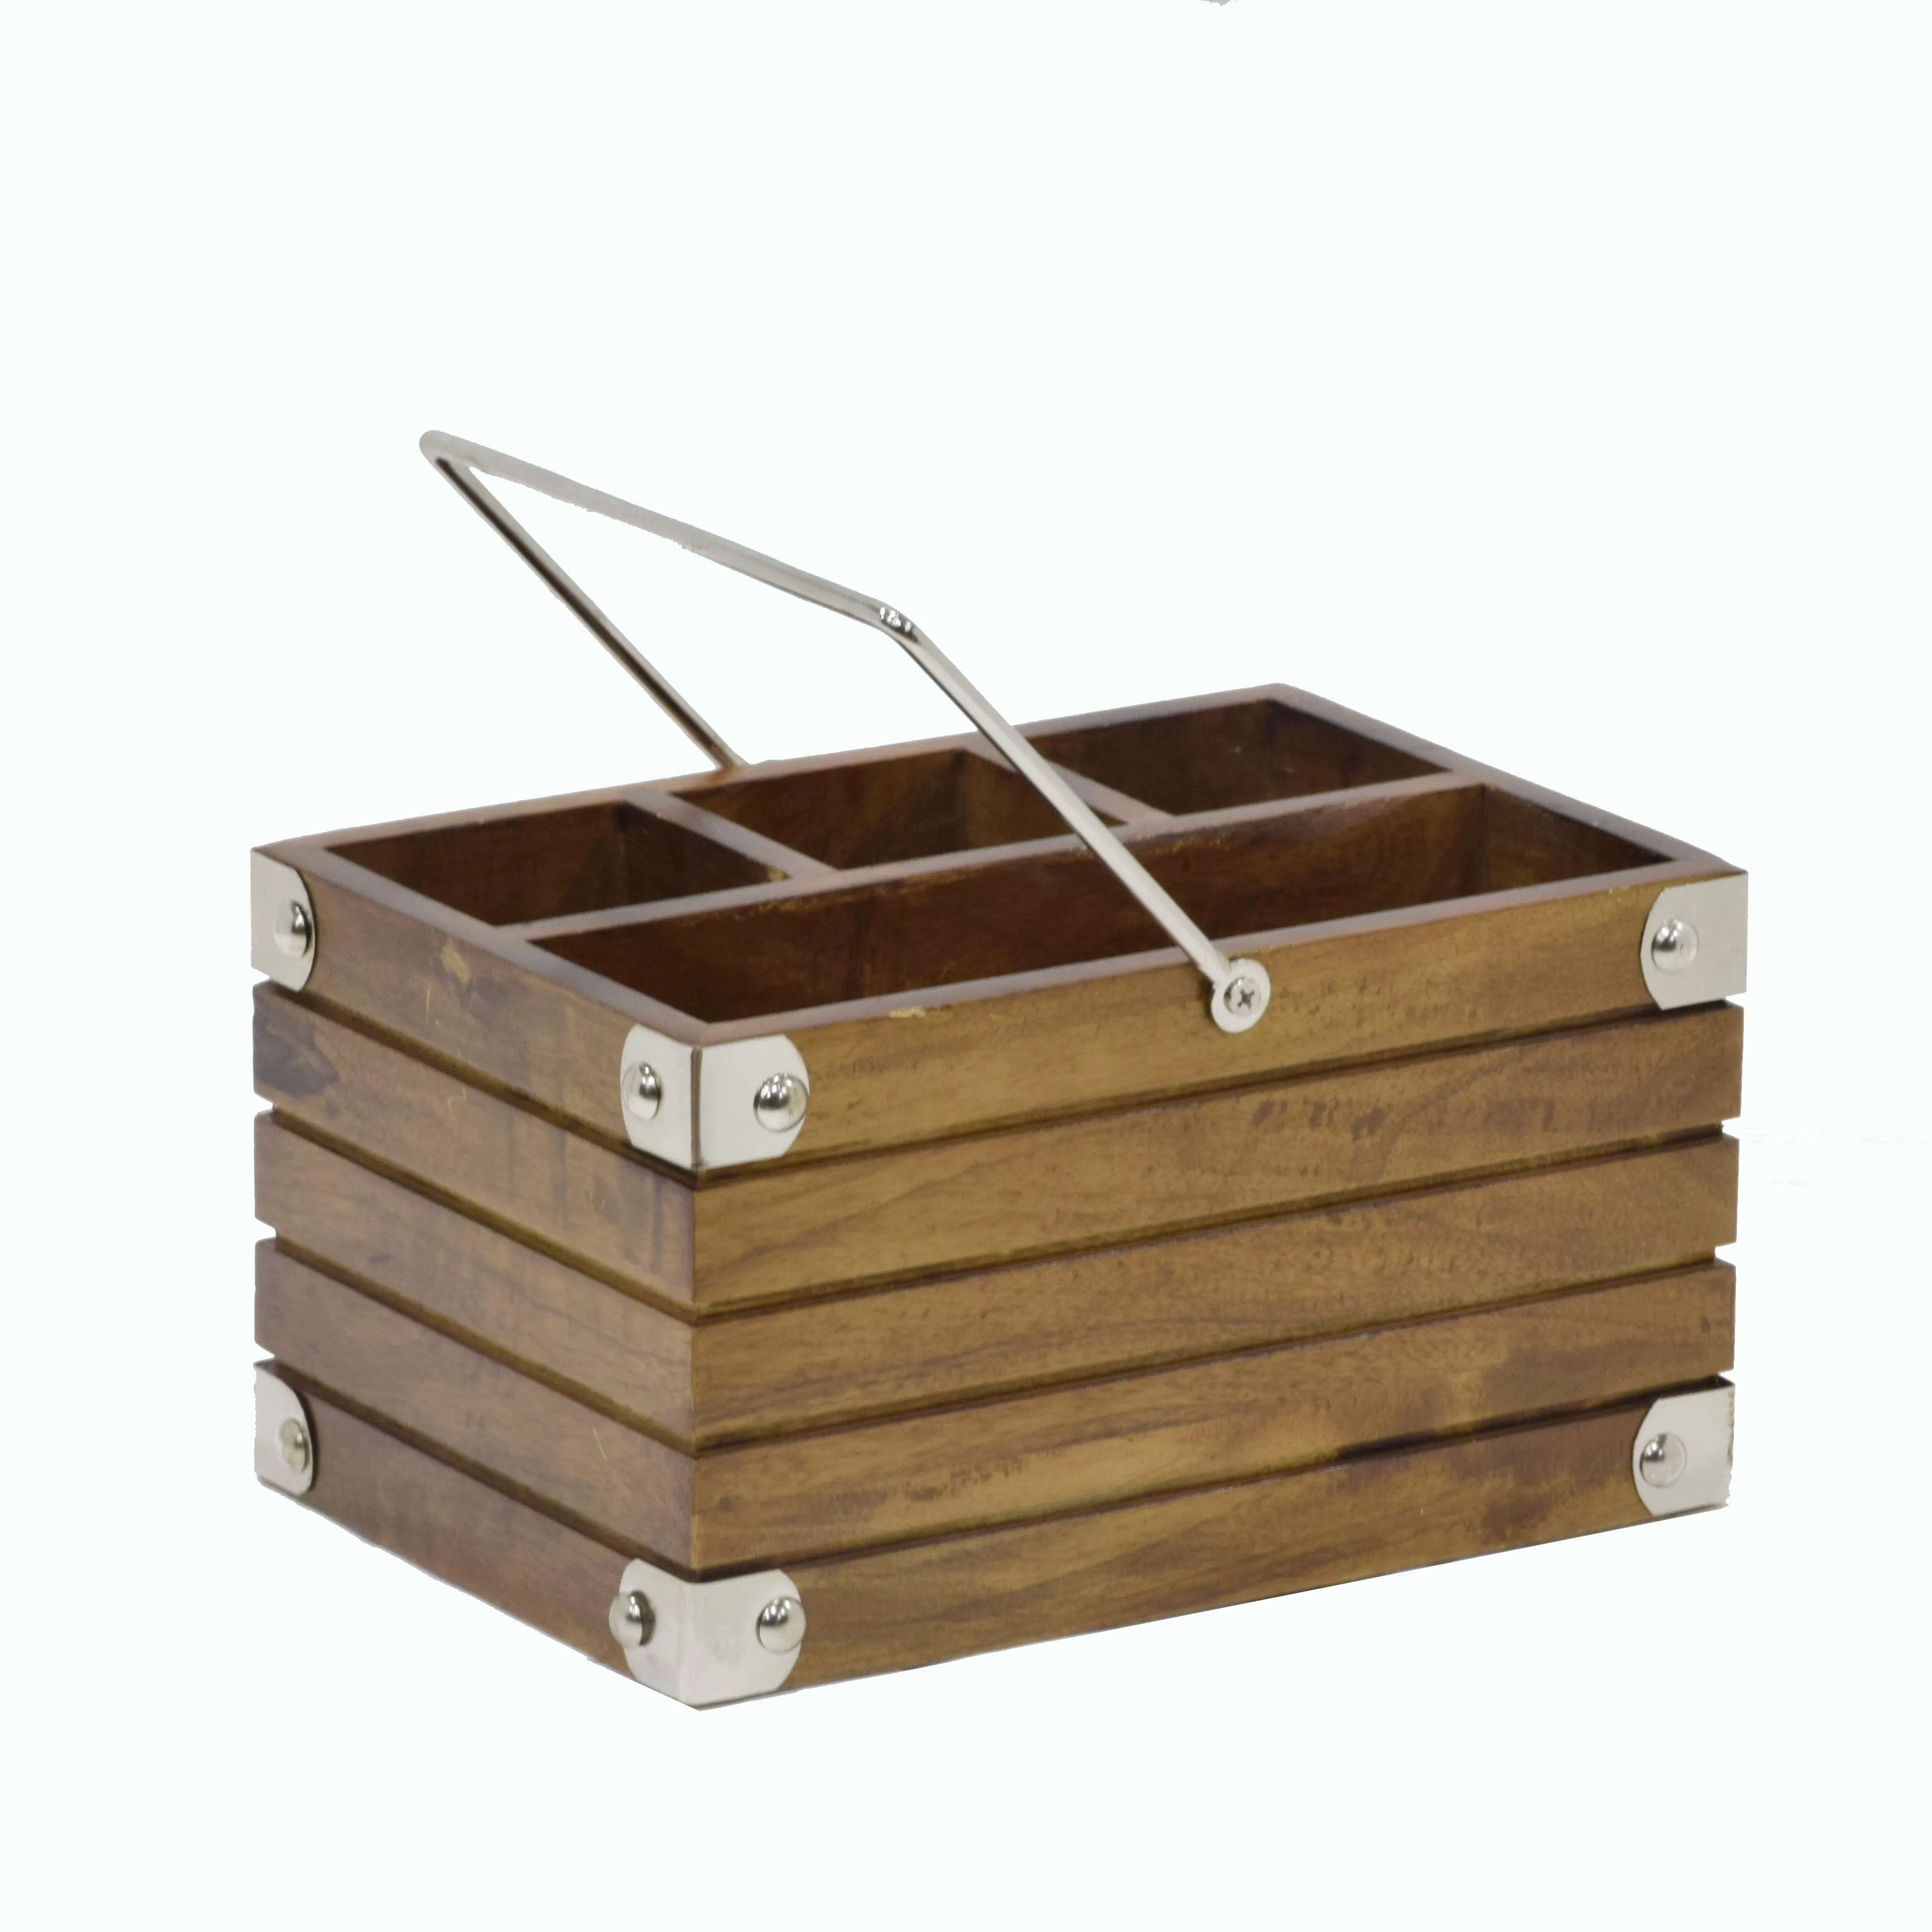 Trending Stylish Caddy With Wooden Handle Wholesale Price Bottle Holder New Modern Design Beer Caddy In Bulk Quantity